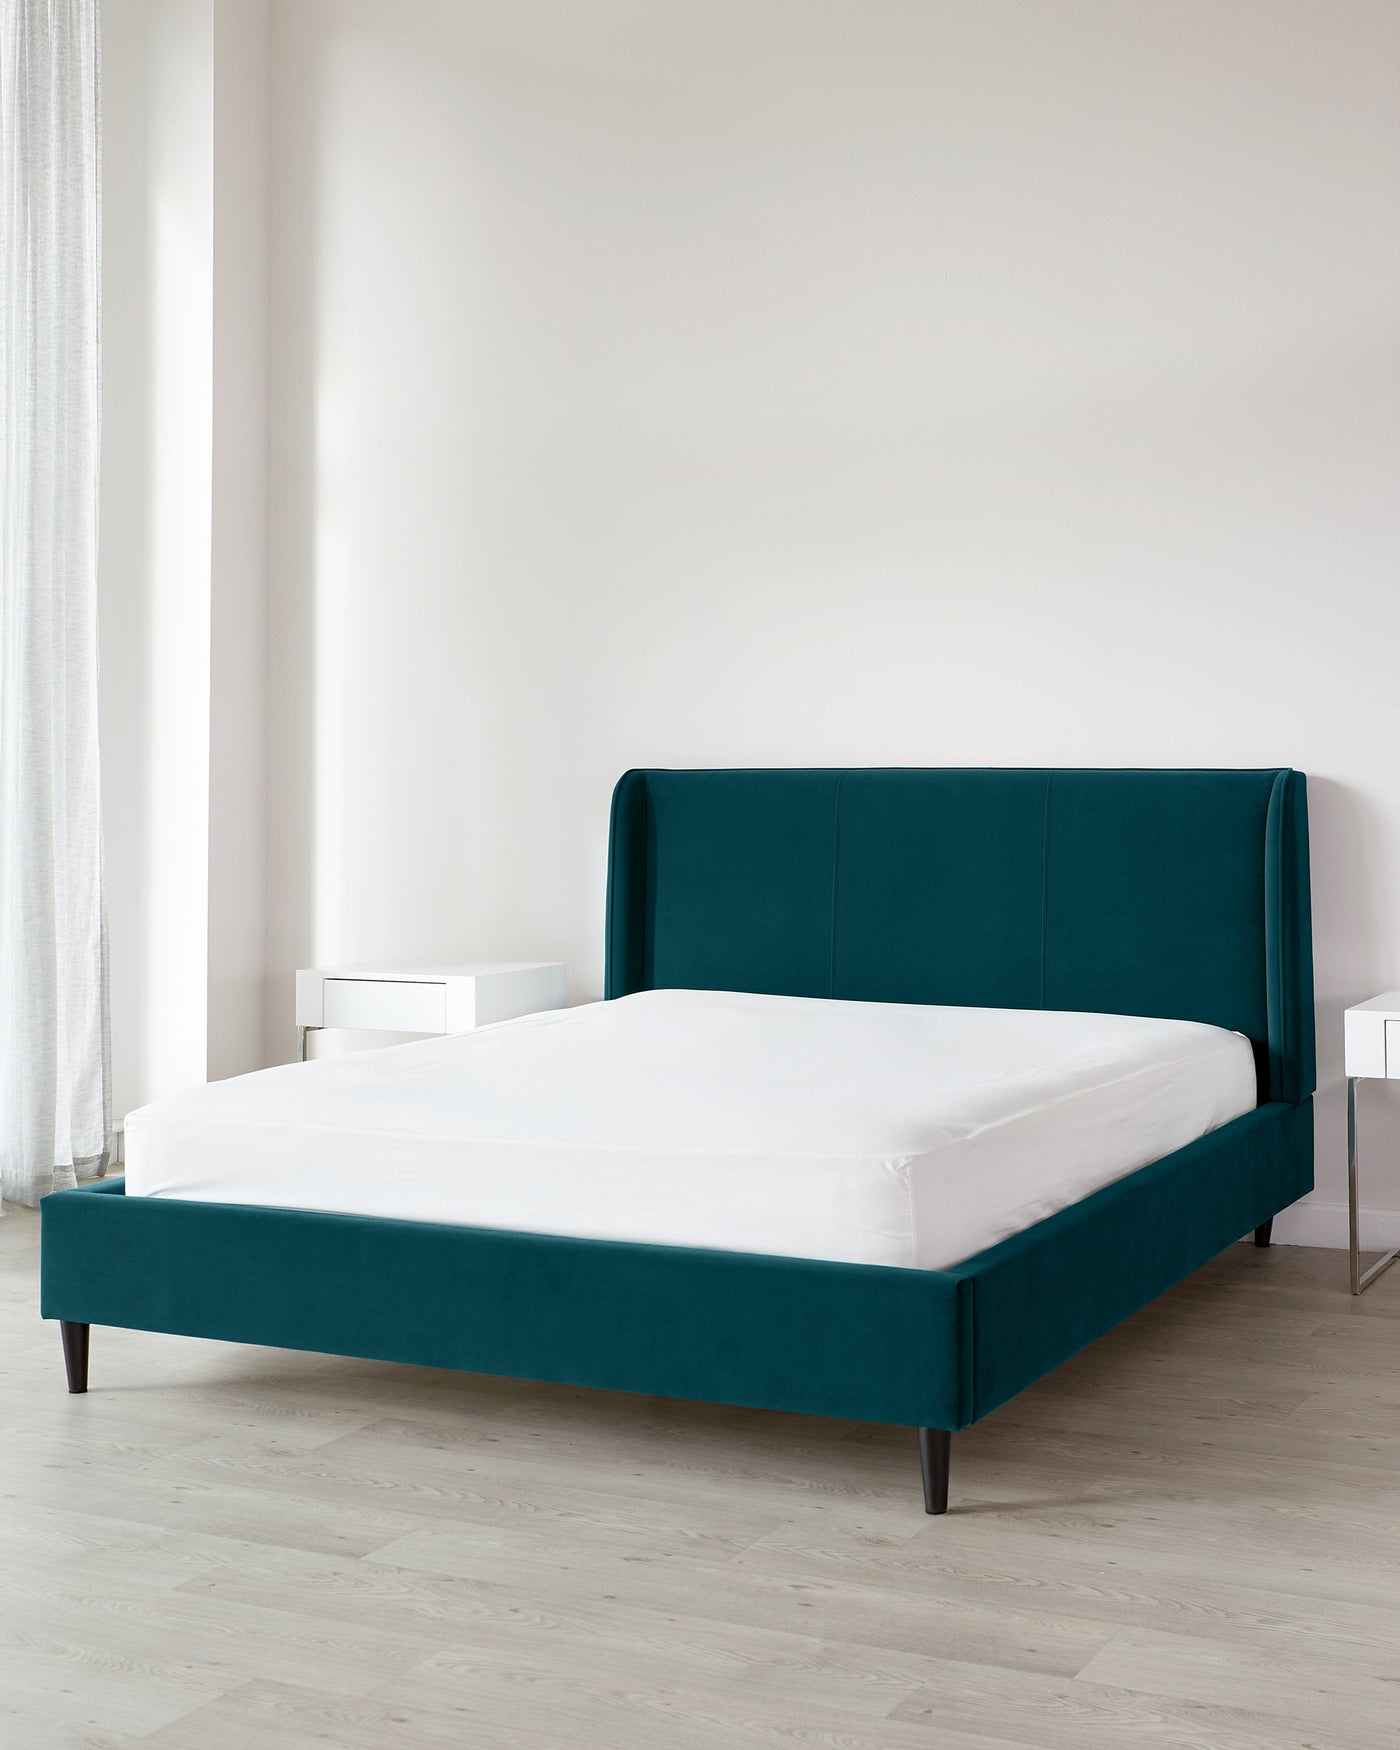 A contemporary emerald green upholstered bed frame with a high headboard, matched with two minimalist white bedside tables, showcased in a room with light wooden flooring and a sheer curtain.